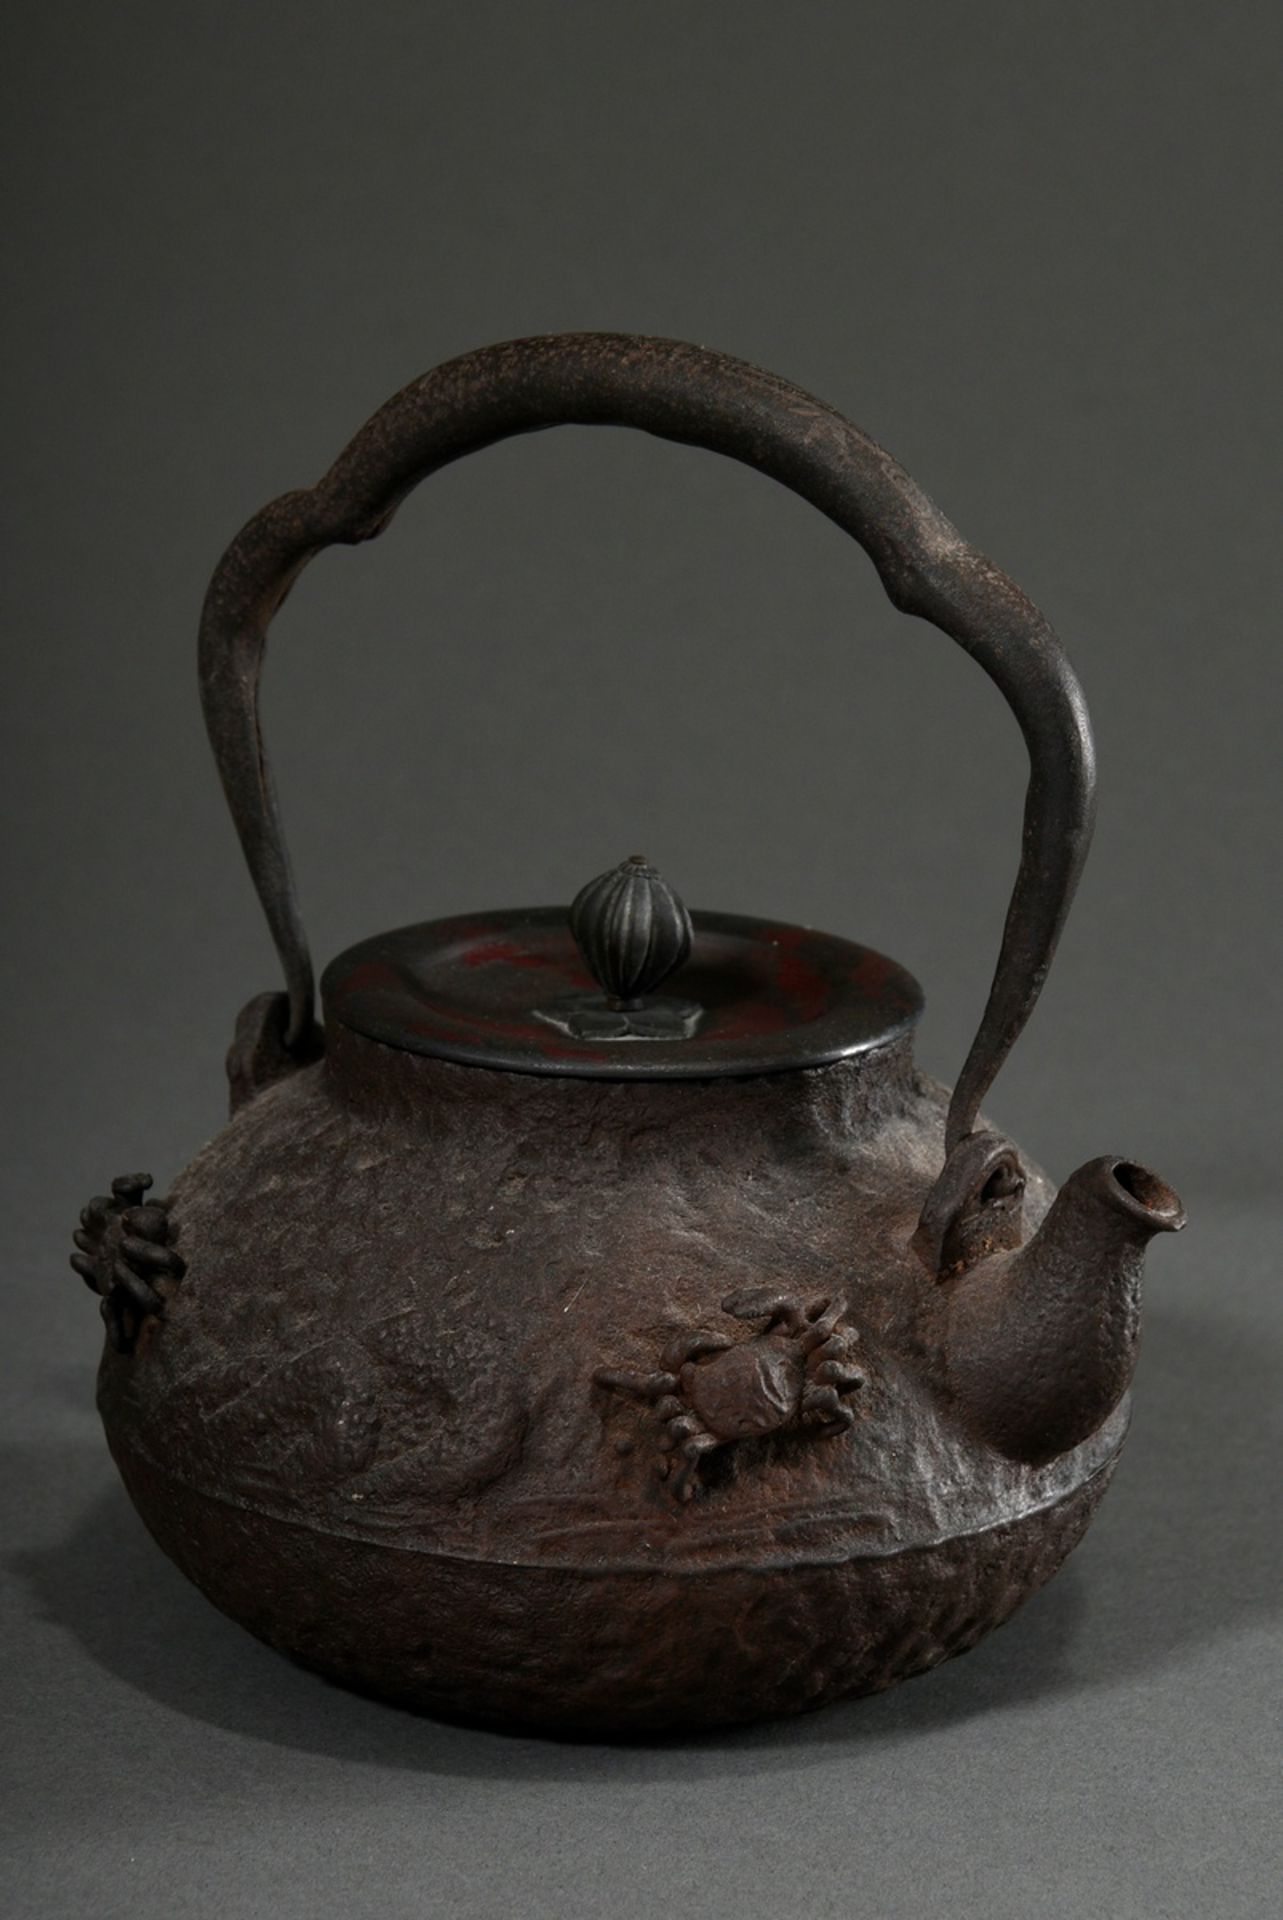 Iron Tetsubin water kettle "Two crabs and sedge", bronze lid signed inside, Japan 19th/20th c., h.